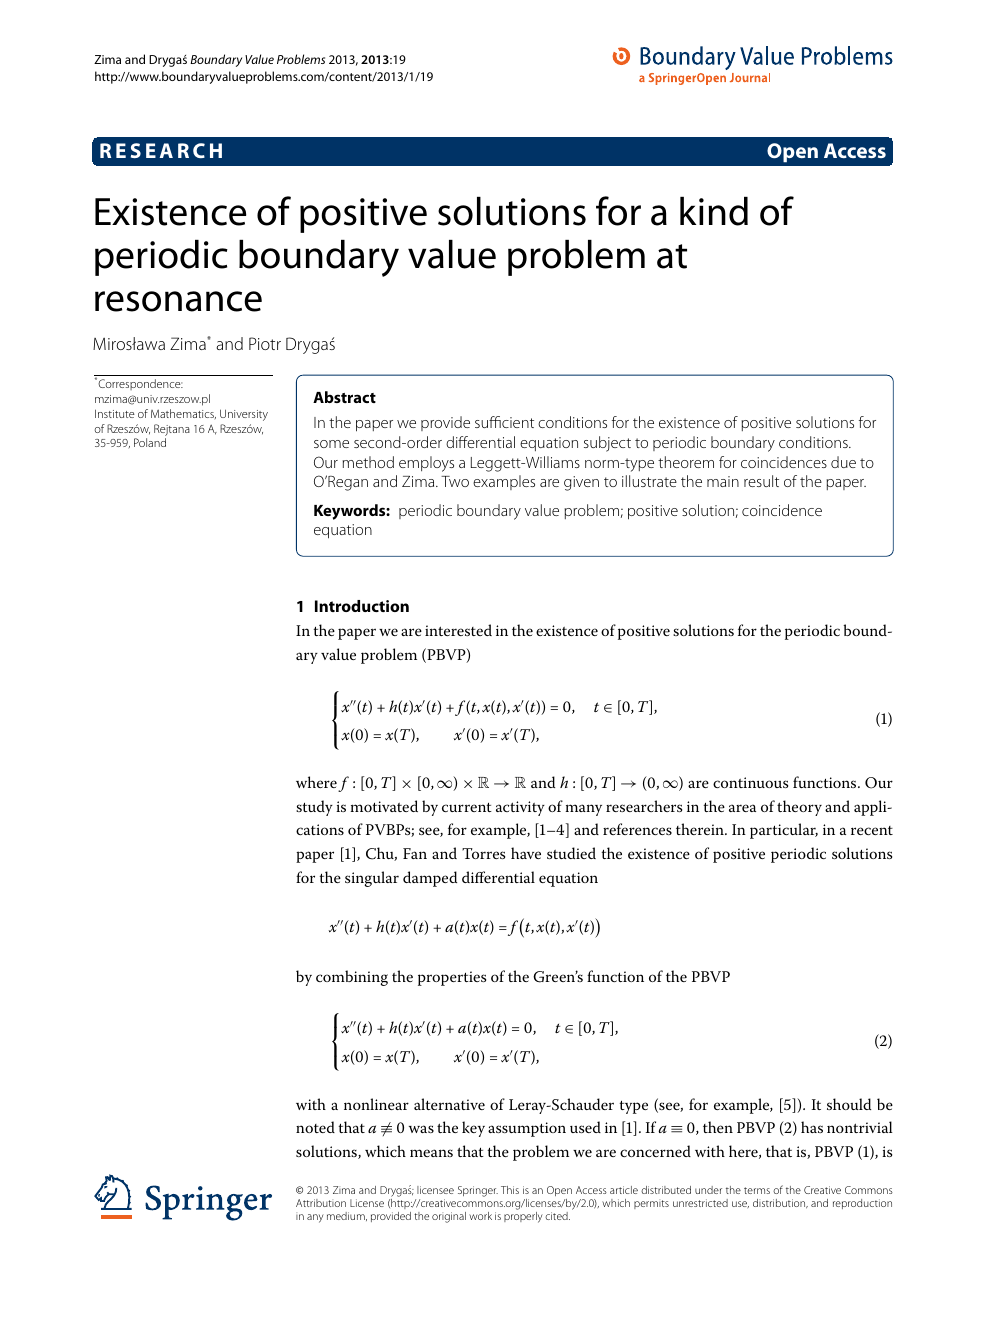 Existence Of Positive Solutions For A Kind Of Periodic Boundary Value Problem At Resonance Topic Of Research Paper In Mathematics Download Scholarly Article Pdf And Read For Free On Cyberleninka Open